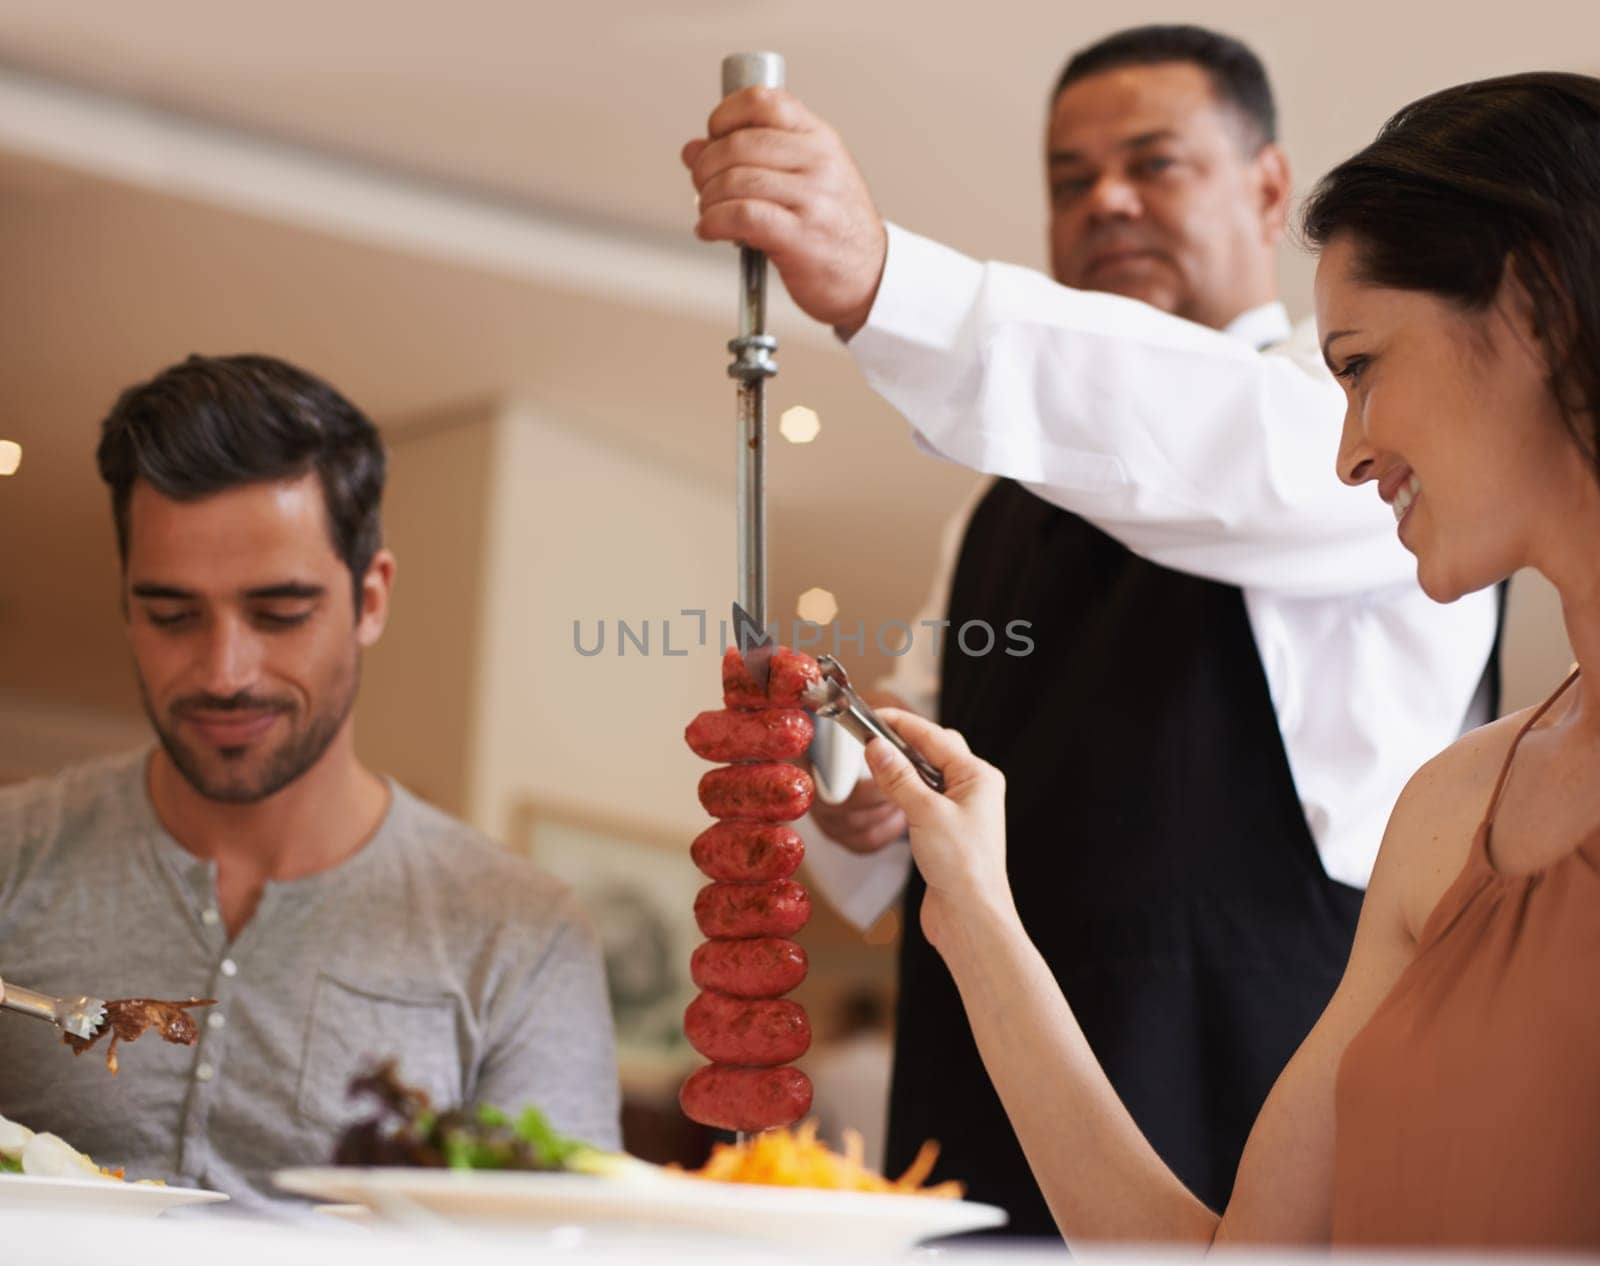 Couple, waiter and service for lunch in restaurant with meat, happiness and fine dining for anniversary or honeymoon. Man, woman and employee with sausage on skewer, healthy meal and table in London.